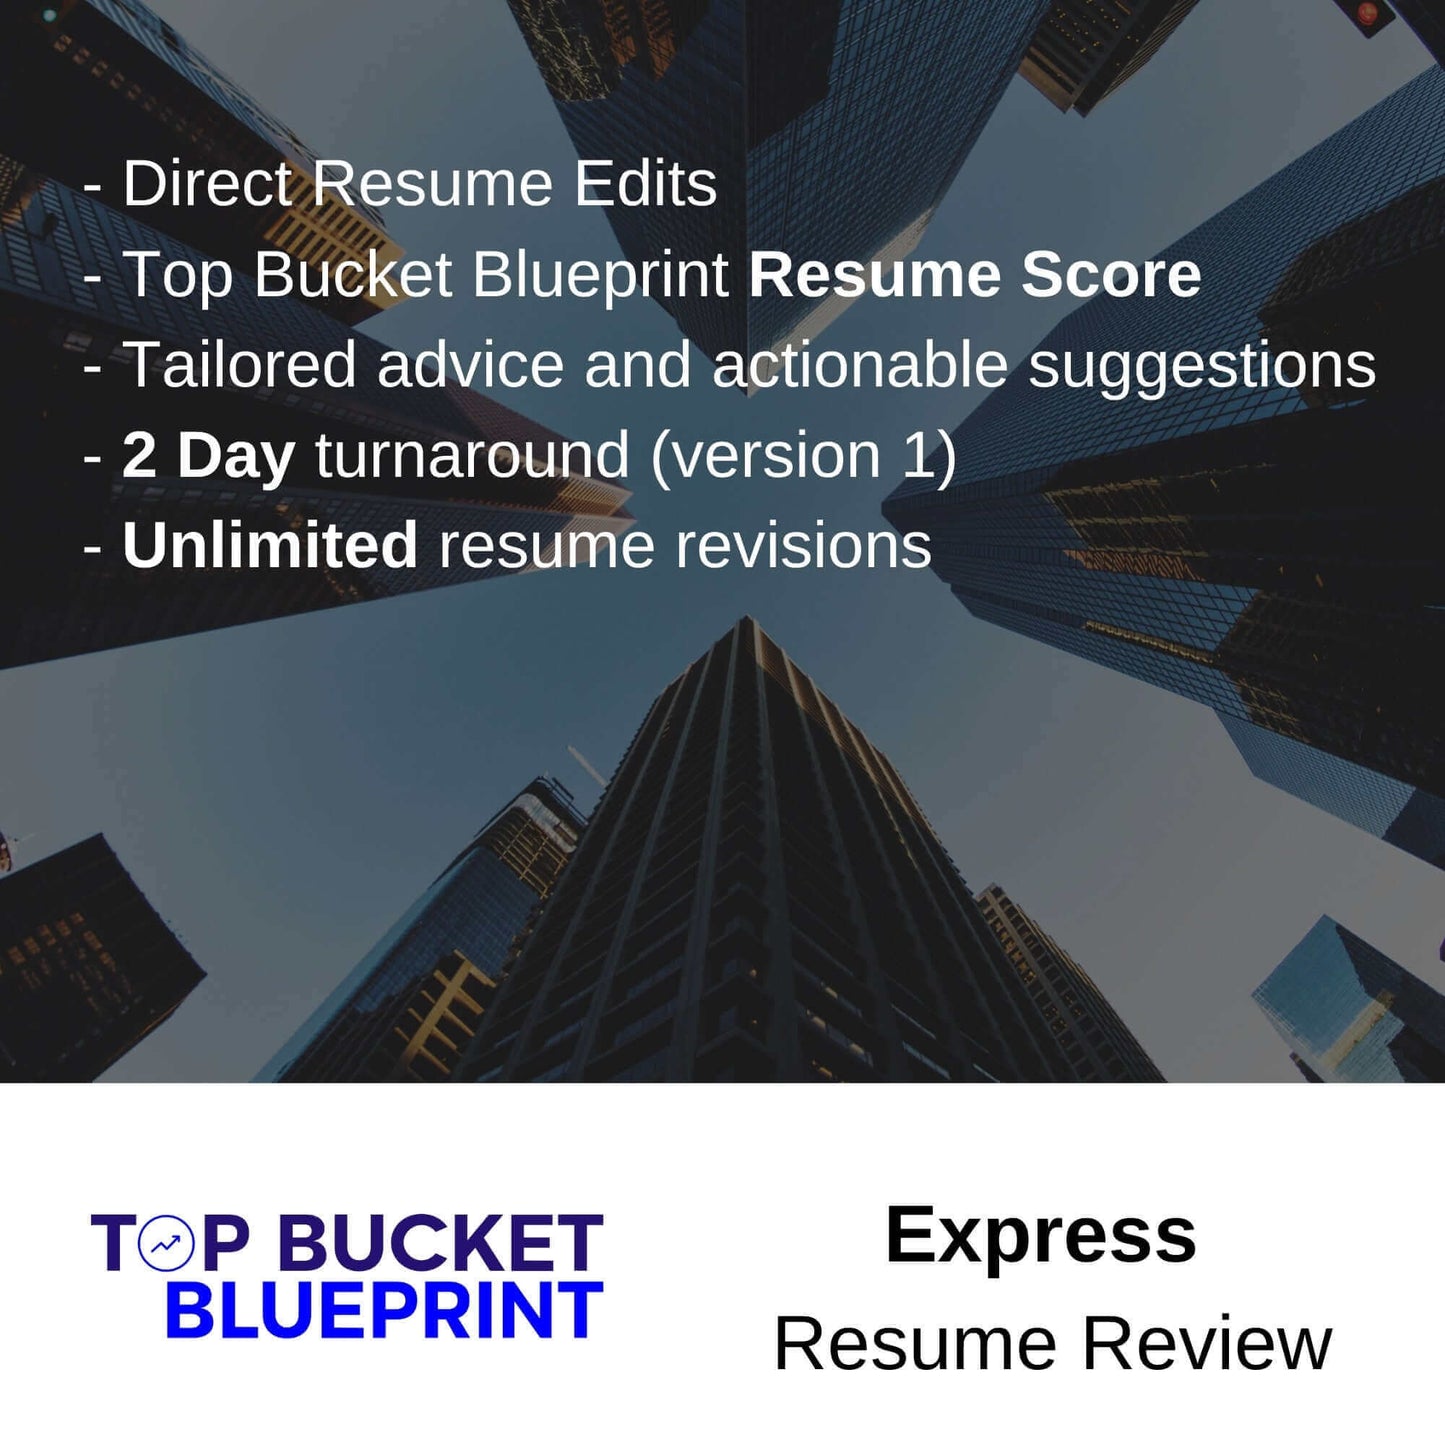 Top Bucket Blueprint Investment Banking Resume Review - Express